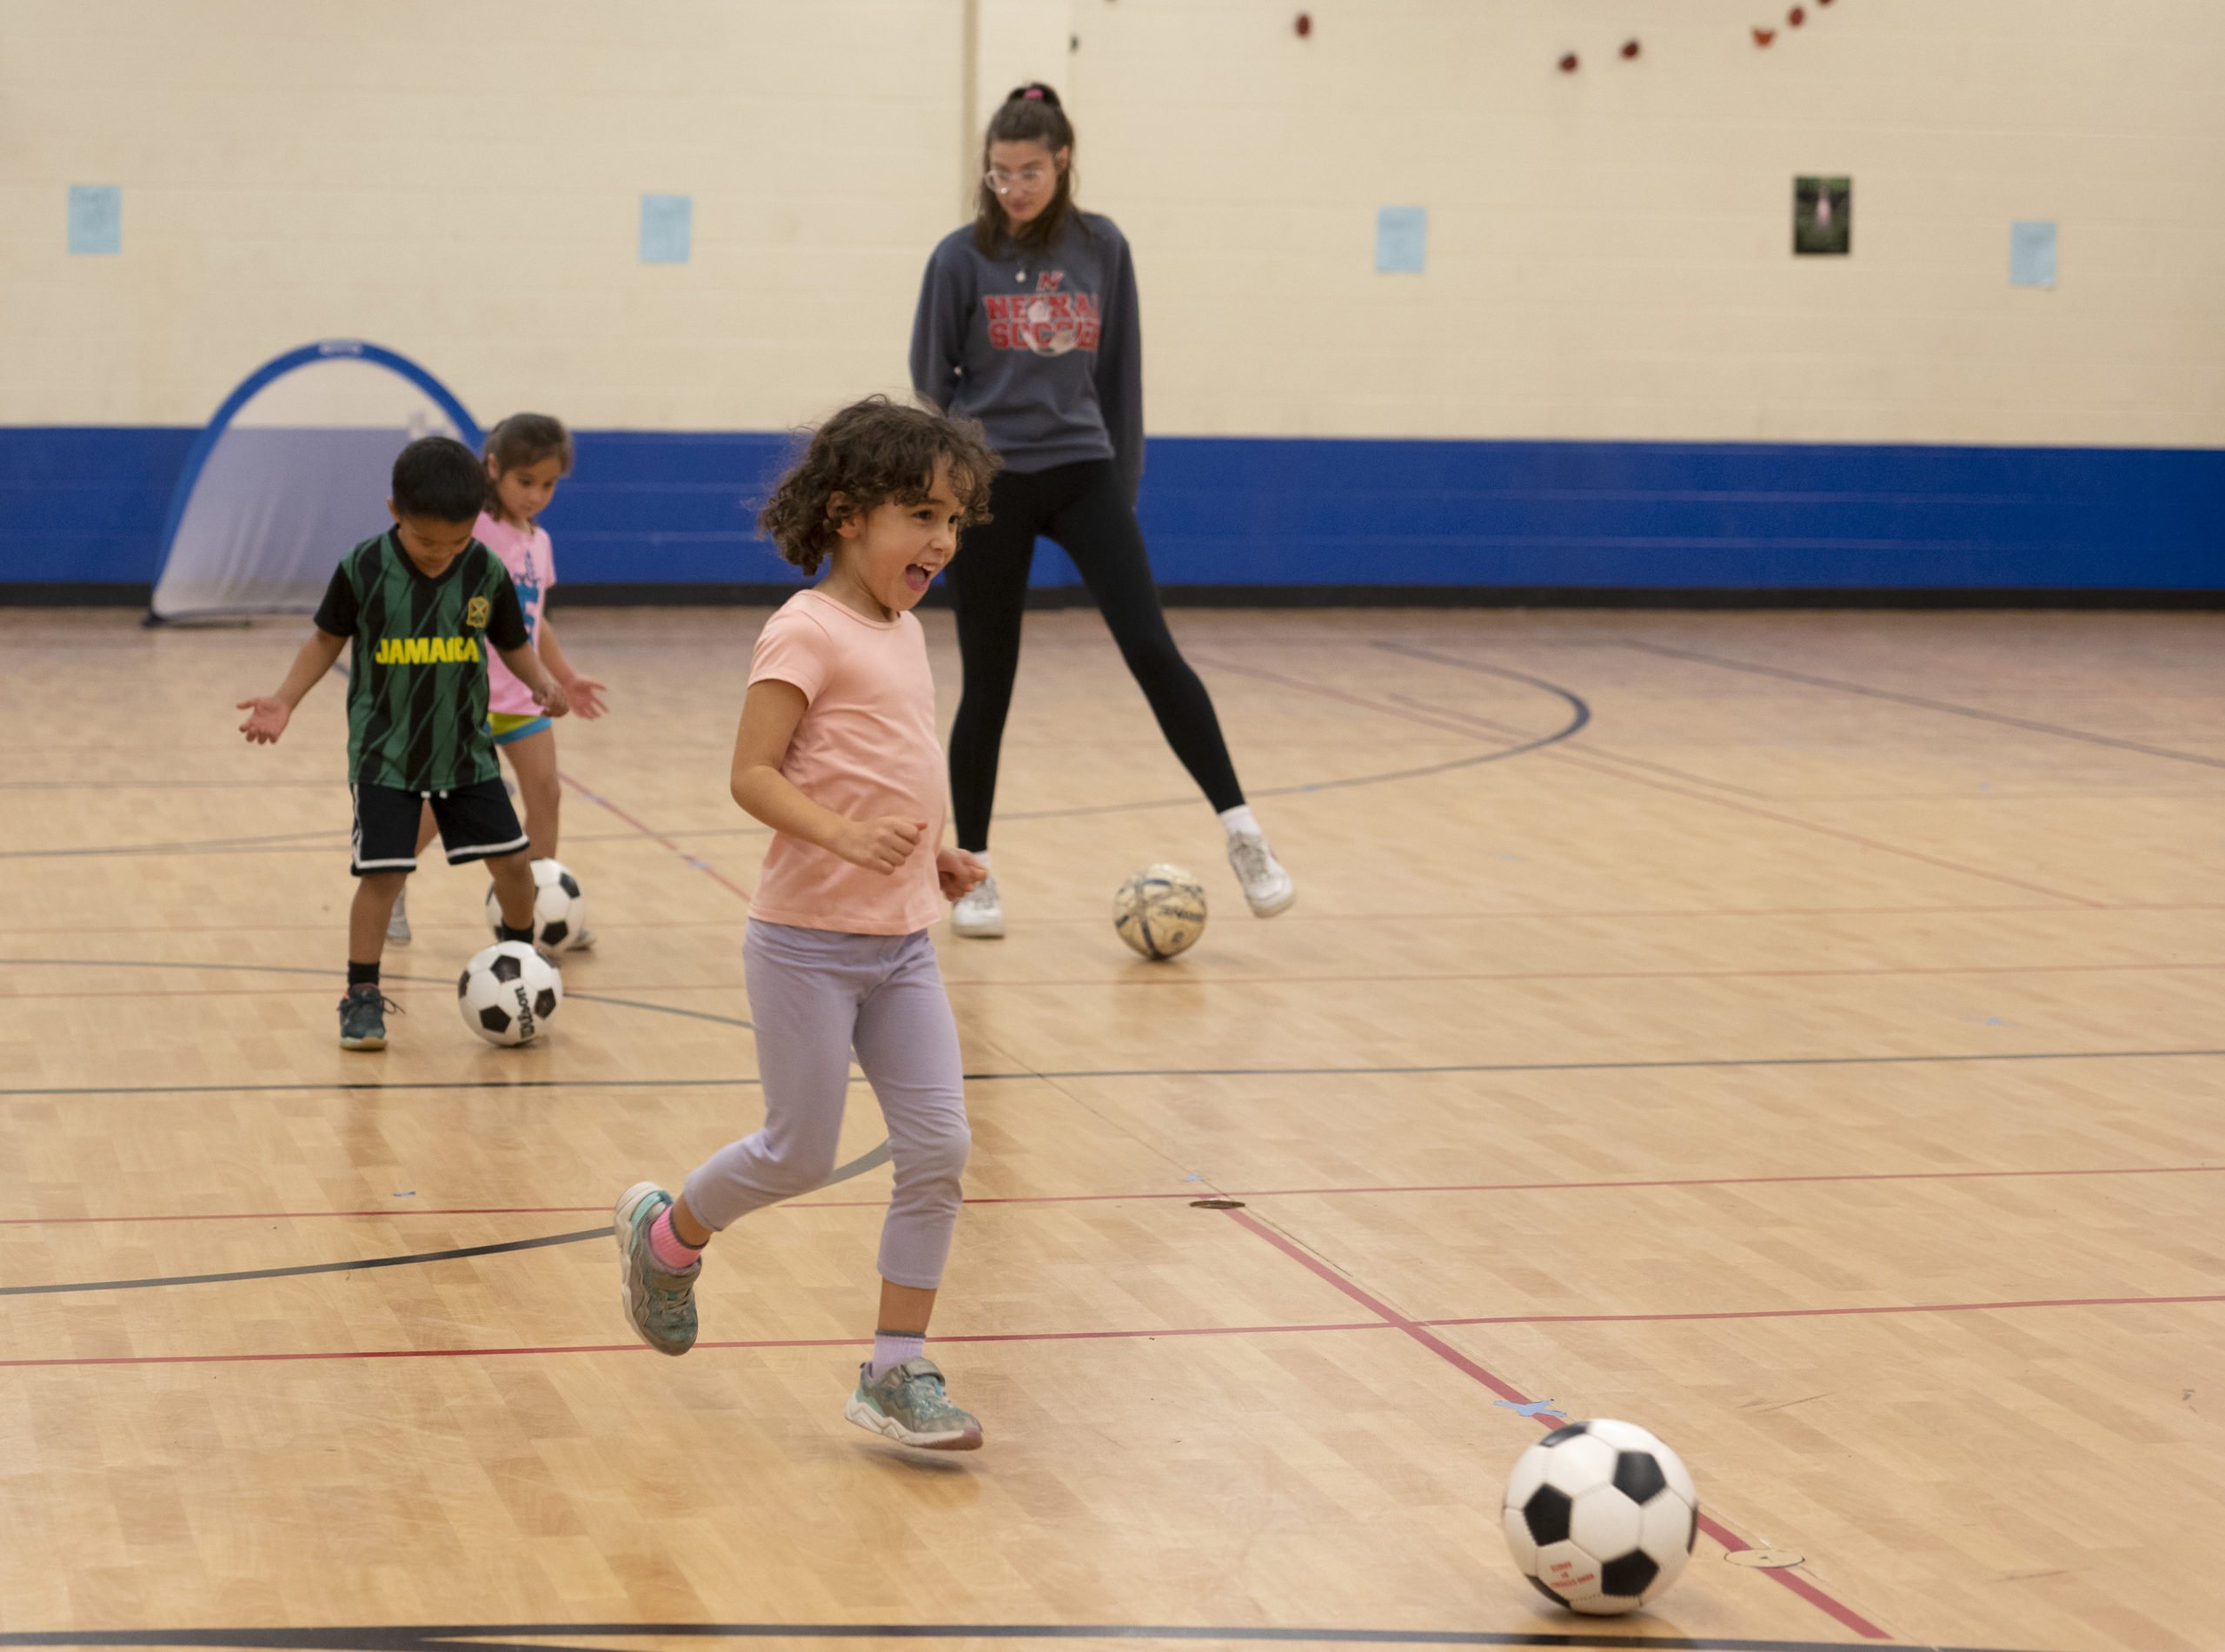 Small kids practicing soccer in a gymnasium while a coach looks on